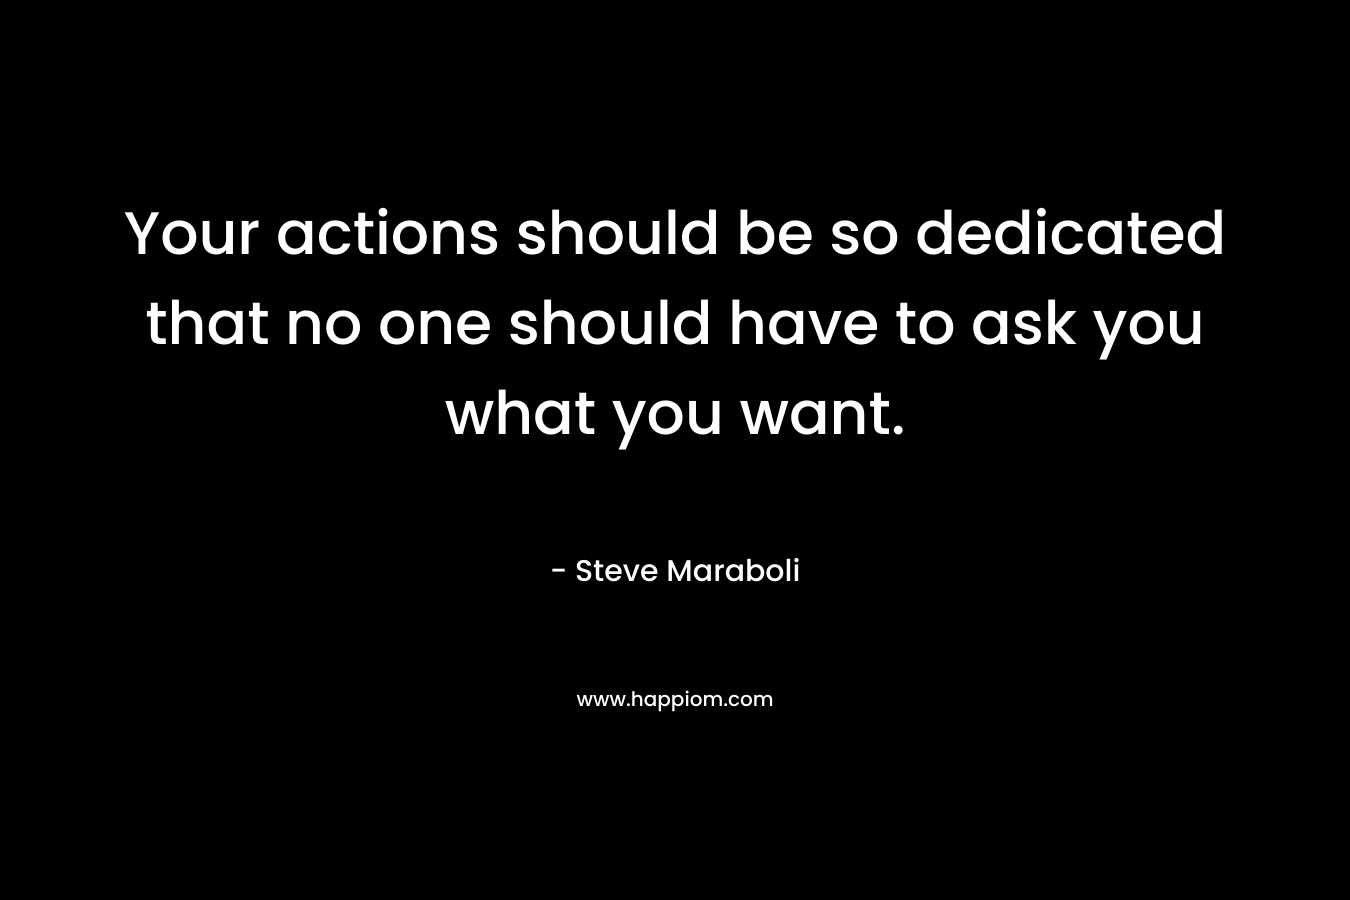 Your actions should be so dedicated that no one should have to ask you what you want.